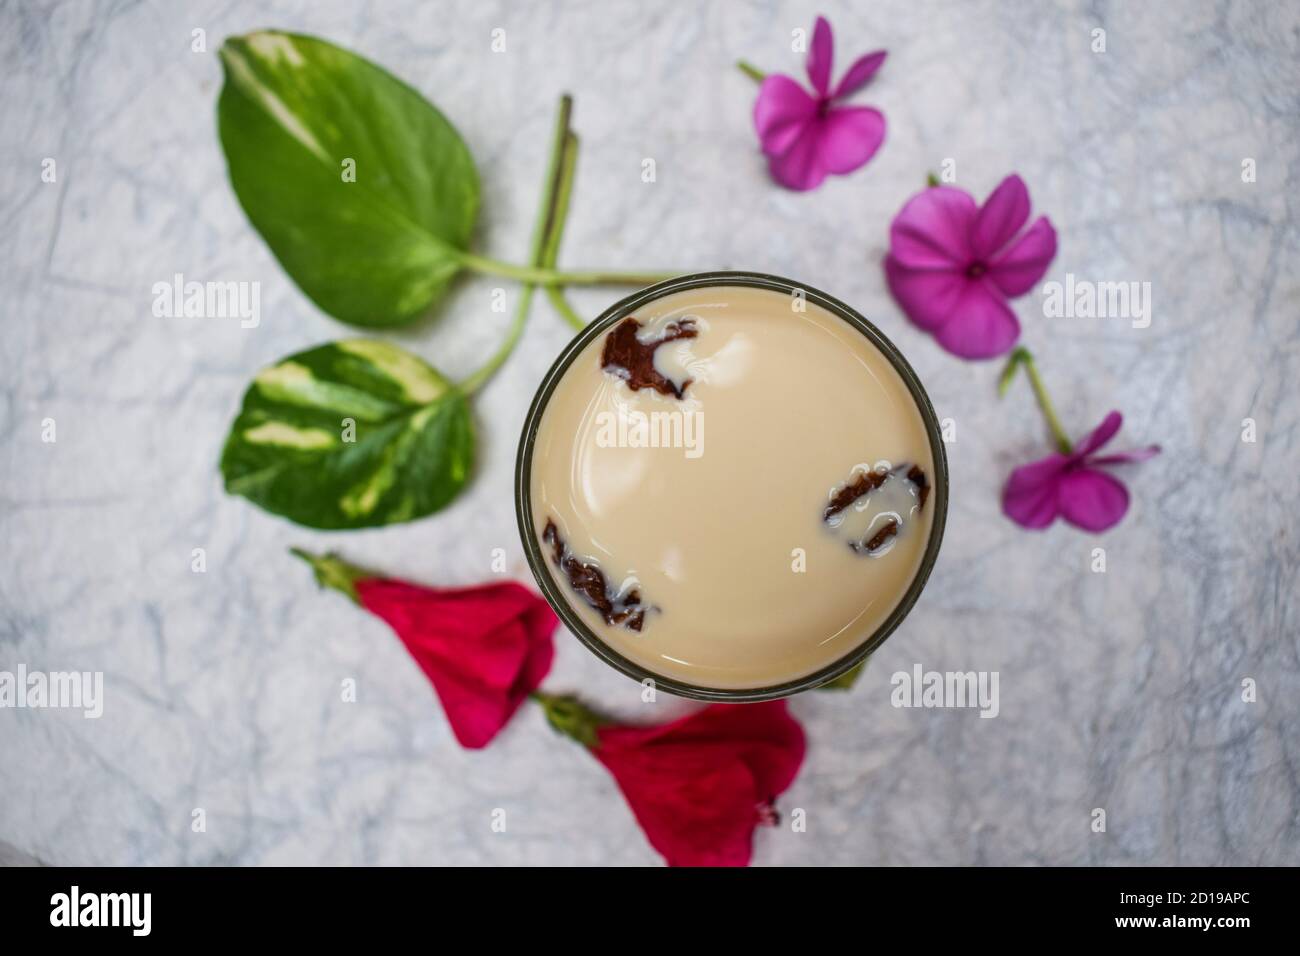 Flavoured Milk (badam milk), A preparation of Milk with Almond and saffron, dried rose petals. Decorated with flowers and leaves. Stock Photo